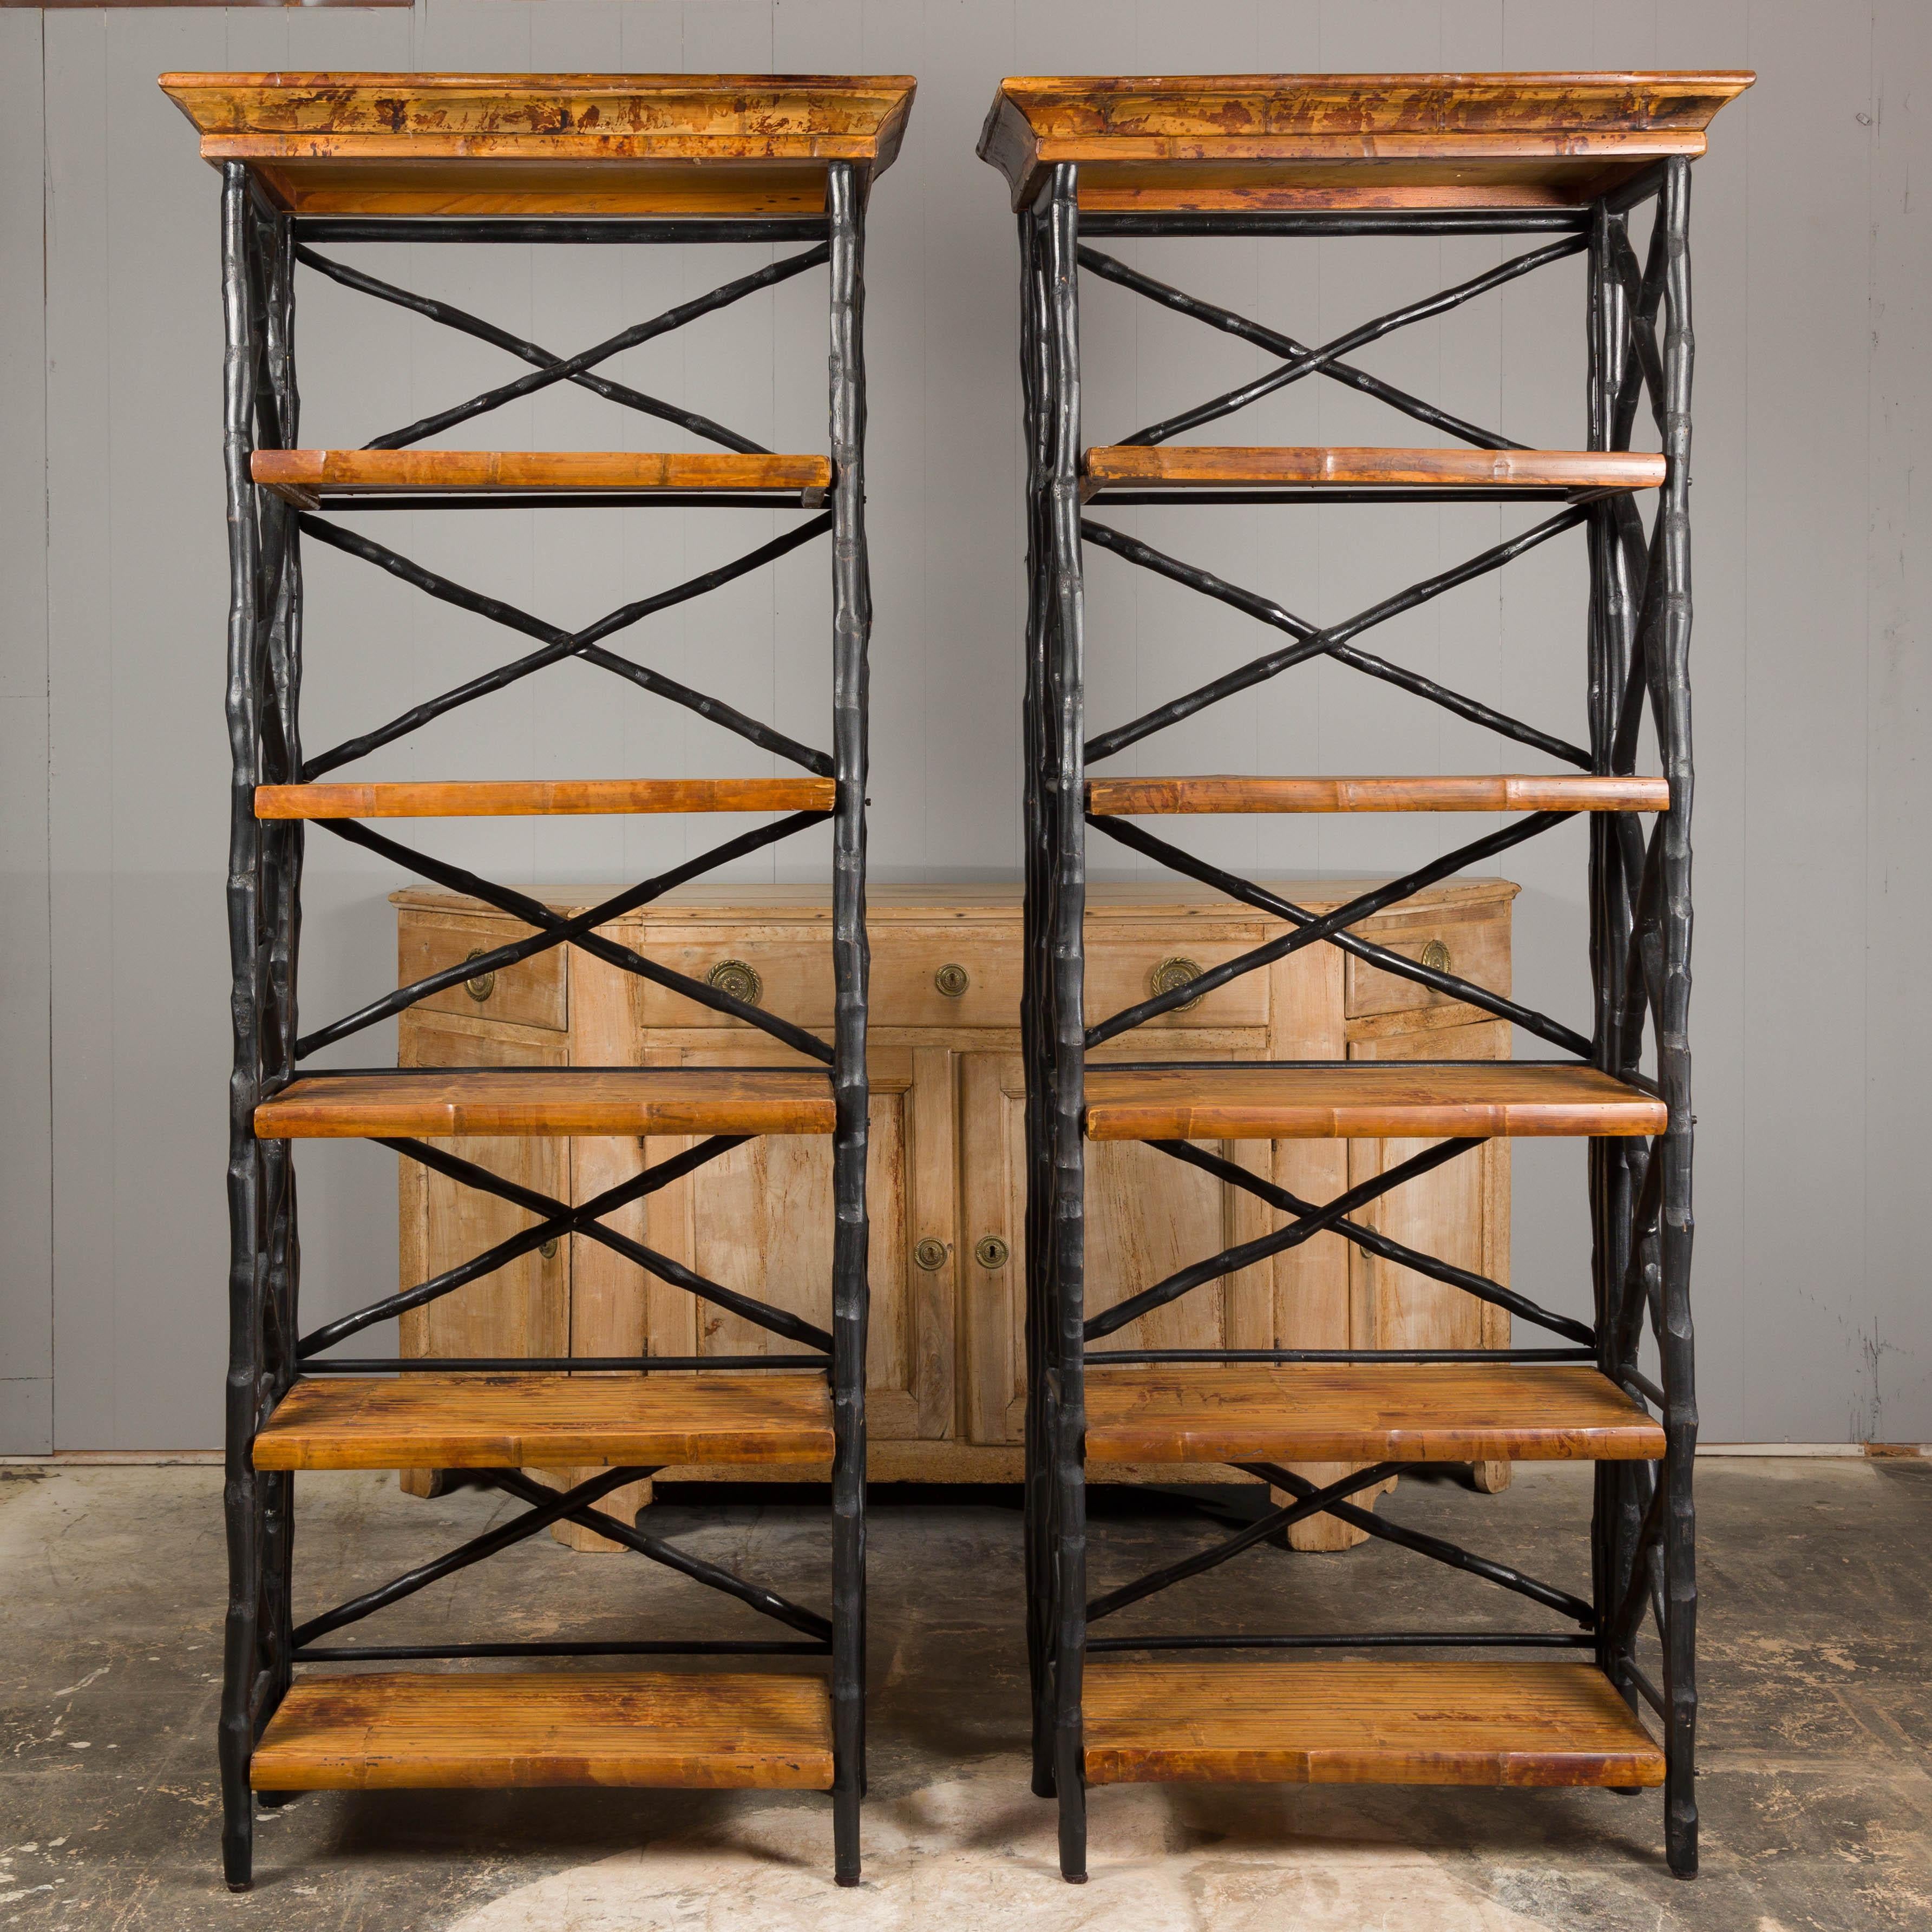 A pair of French tall shelves from the Midcentury period, with black faux-bamboo structure and brown shelves. A stylish manifestation of midcentury French design, this pair of tall shelves, circa mid-20th century, effortlessly merges functional